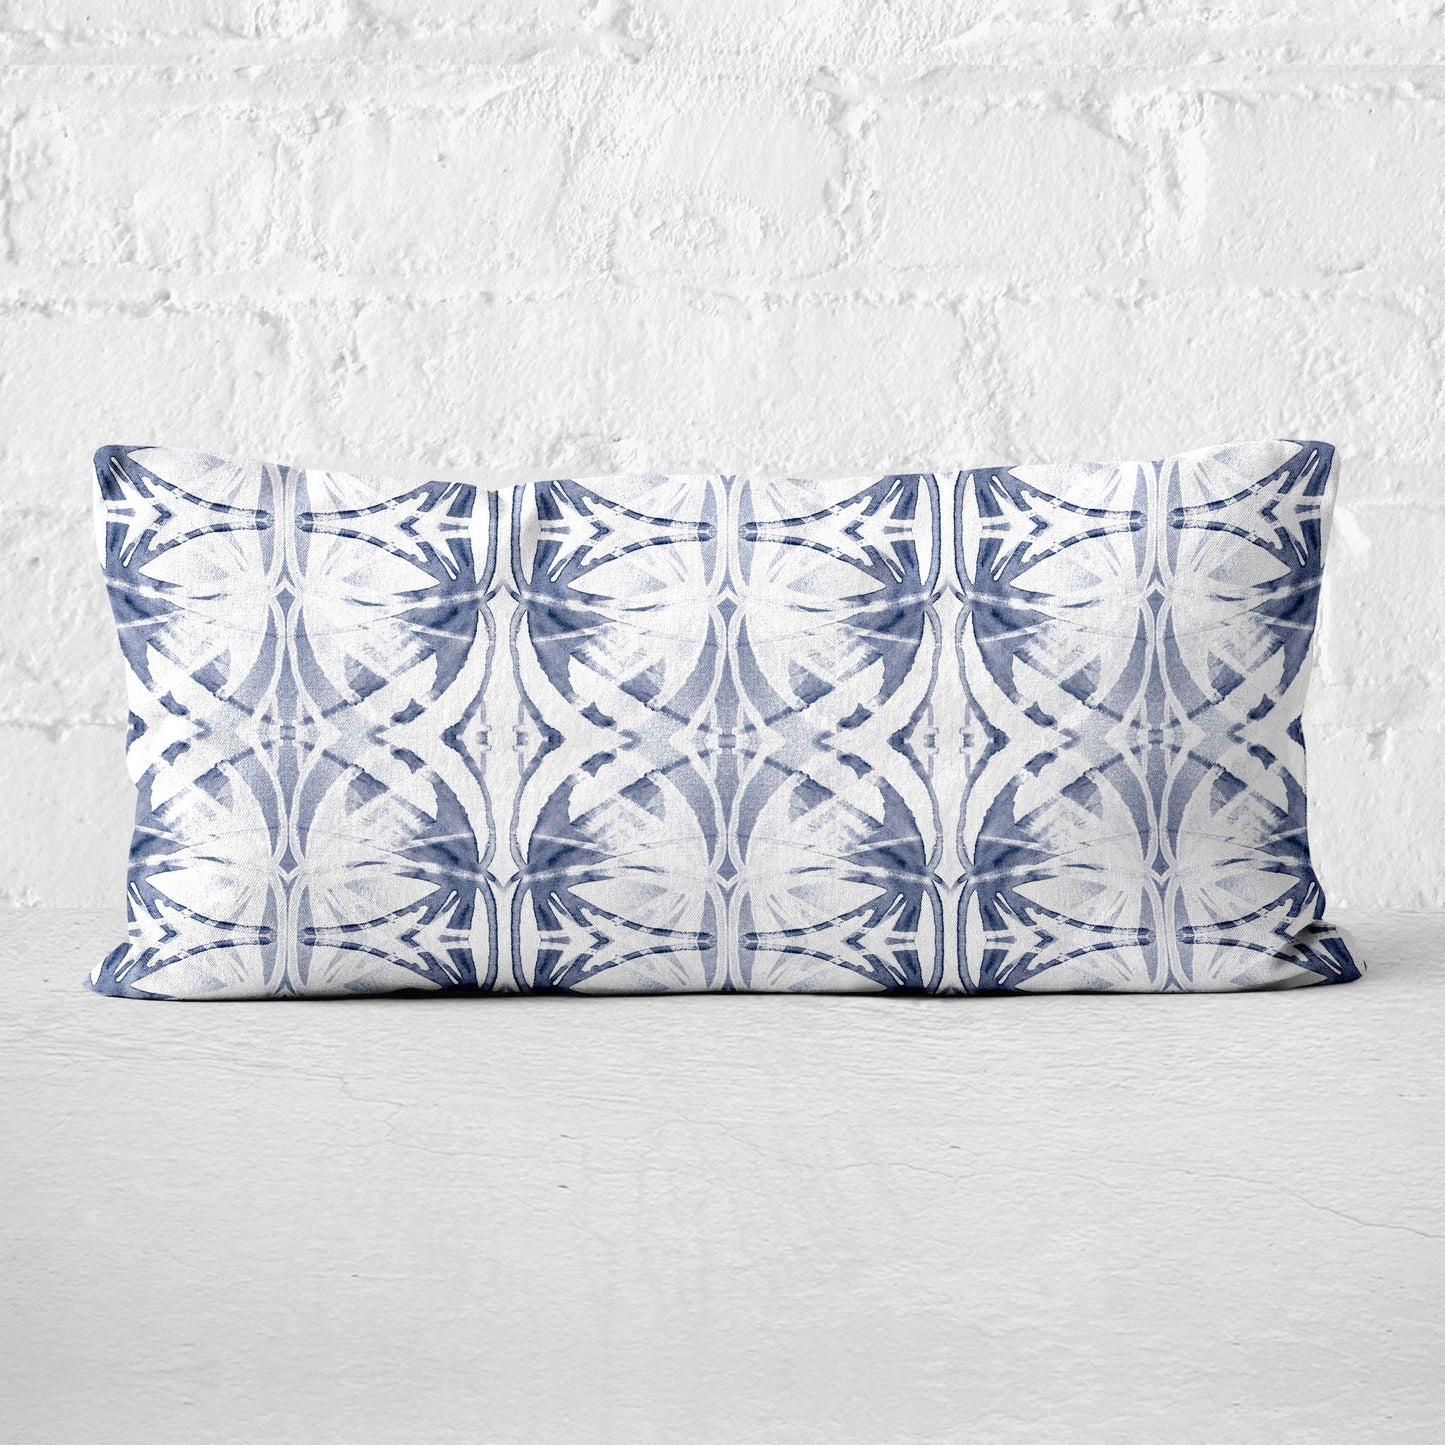 Rectangular pillow featuring abstract painted pattern in light blue and white set against a white brick wall.